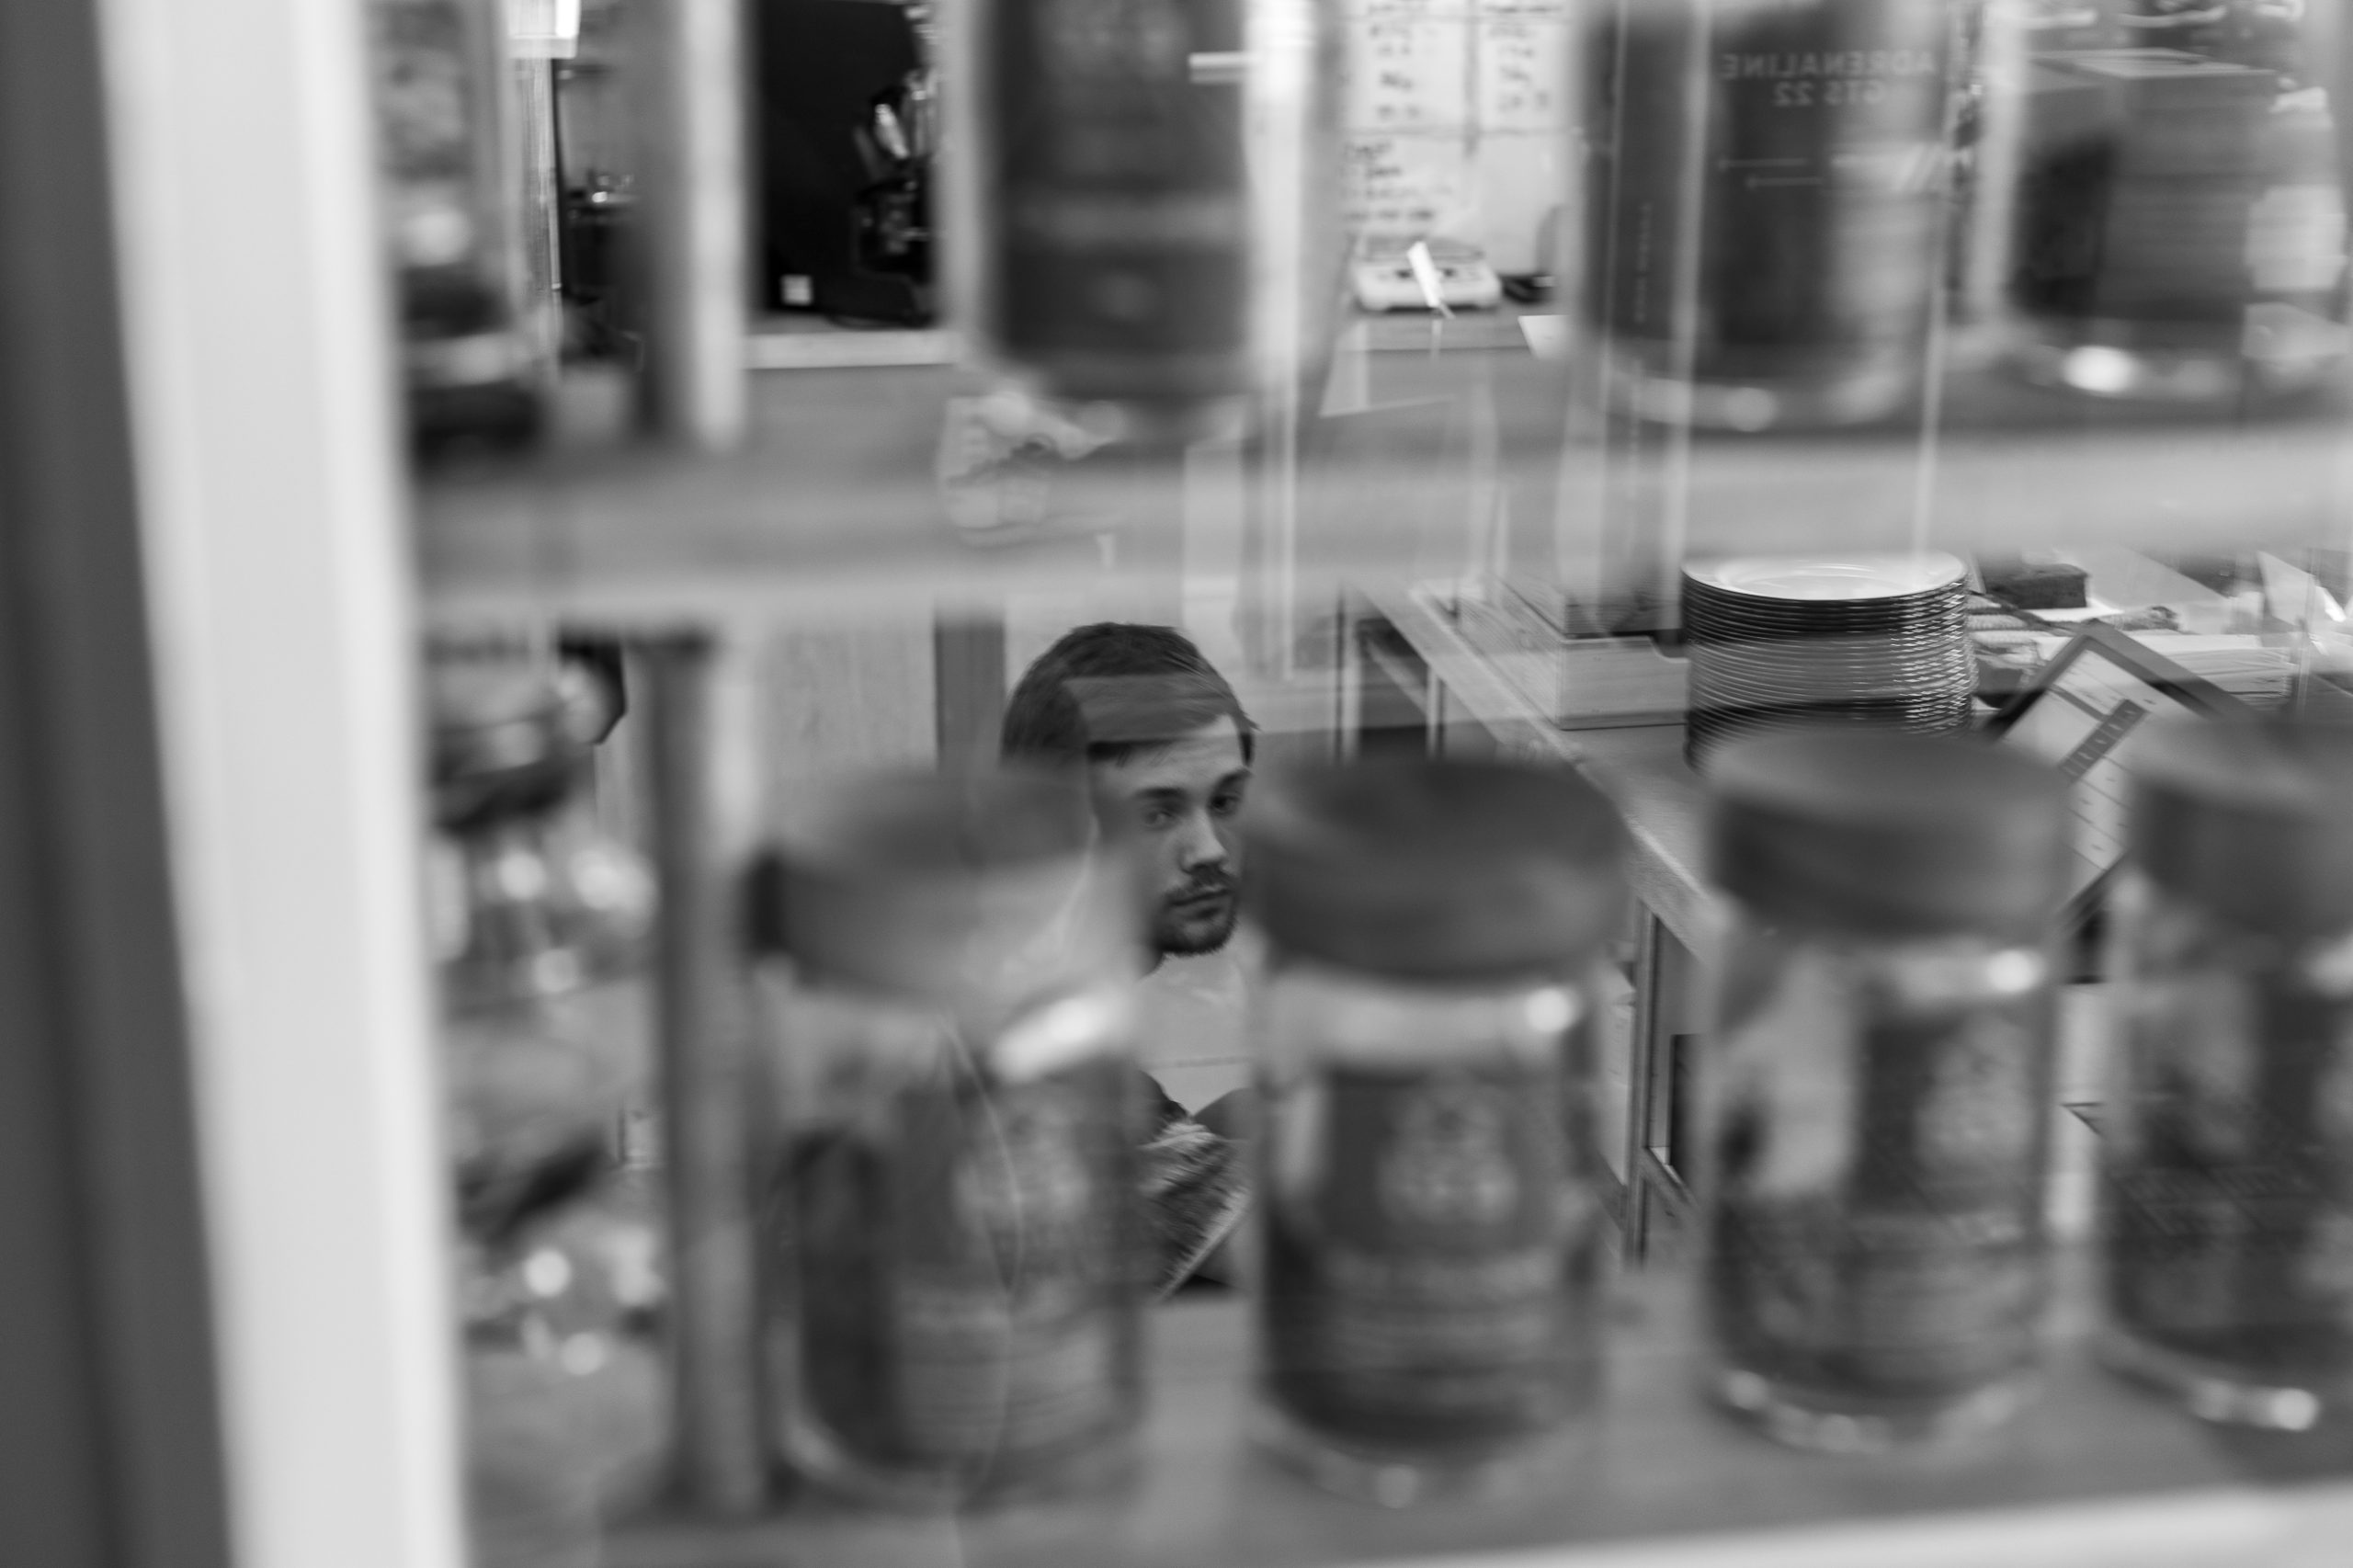 A presenting male crouches behind a counter. The picture is shot through a window and glass jars sitting on shelves.